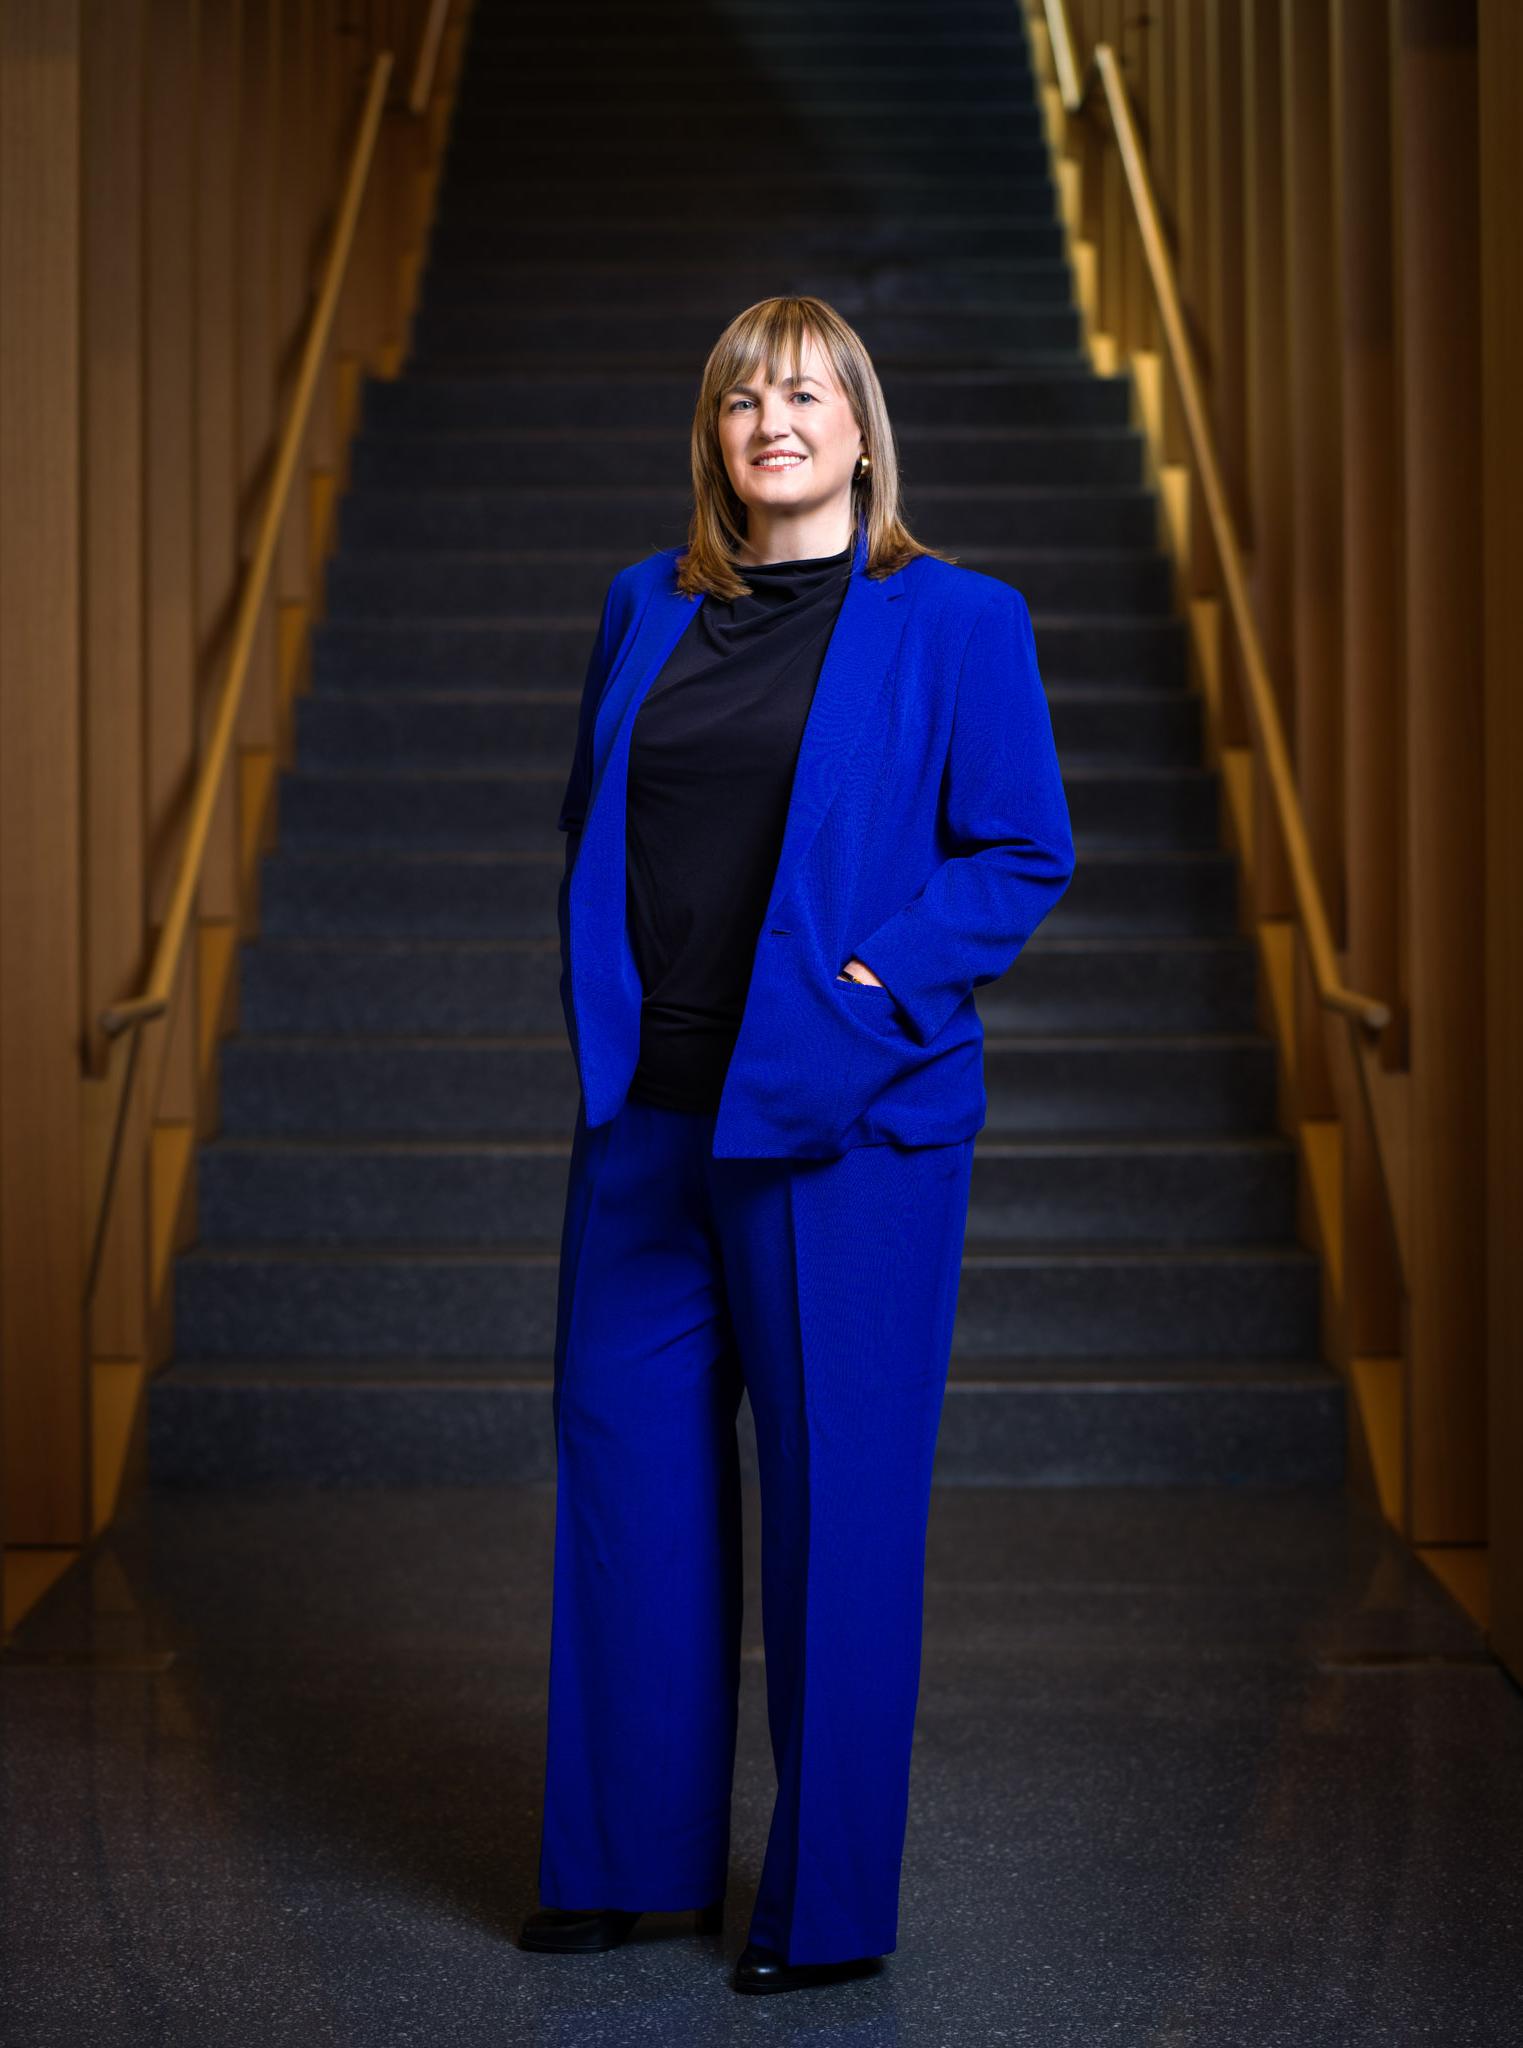 President Laura Rosenbury standing in front of the stairs in the Milstein building. She is wearing a blue suit